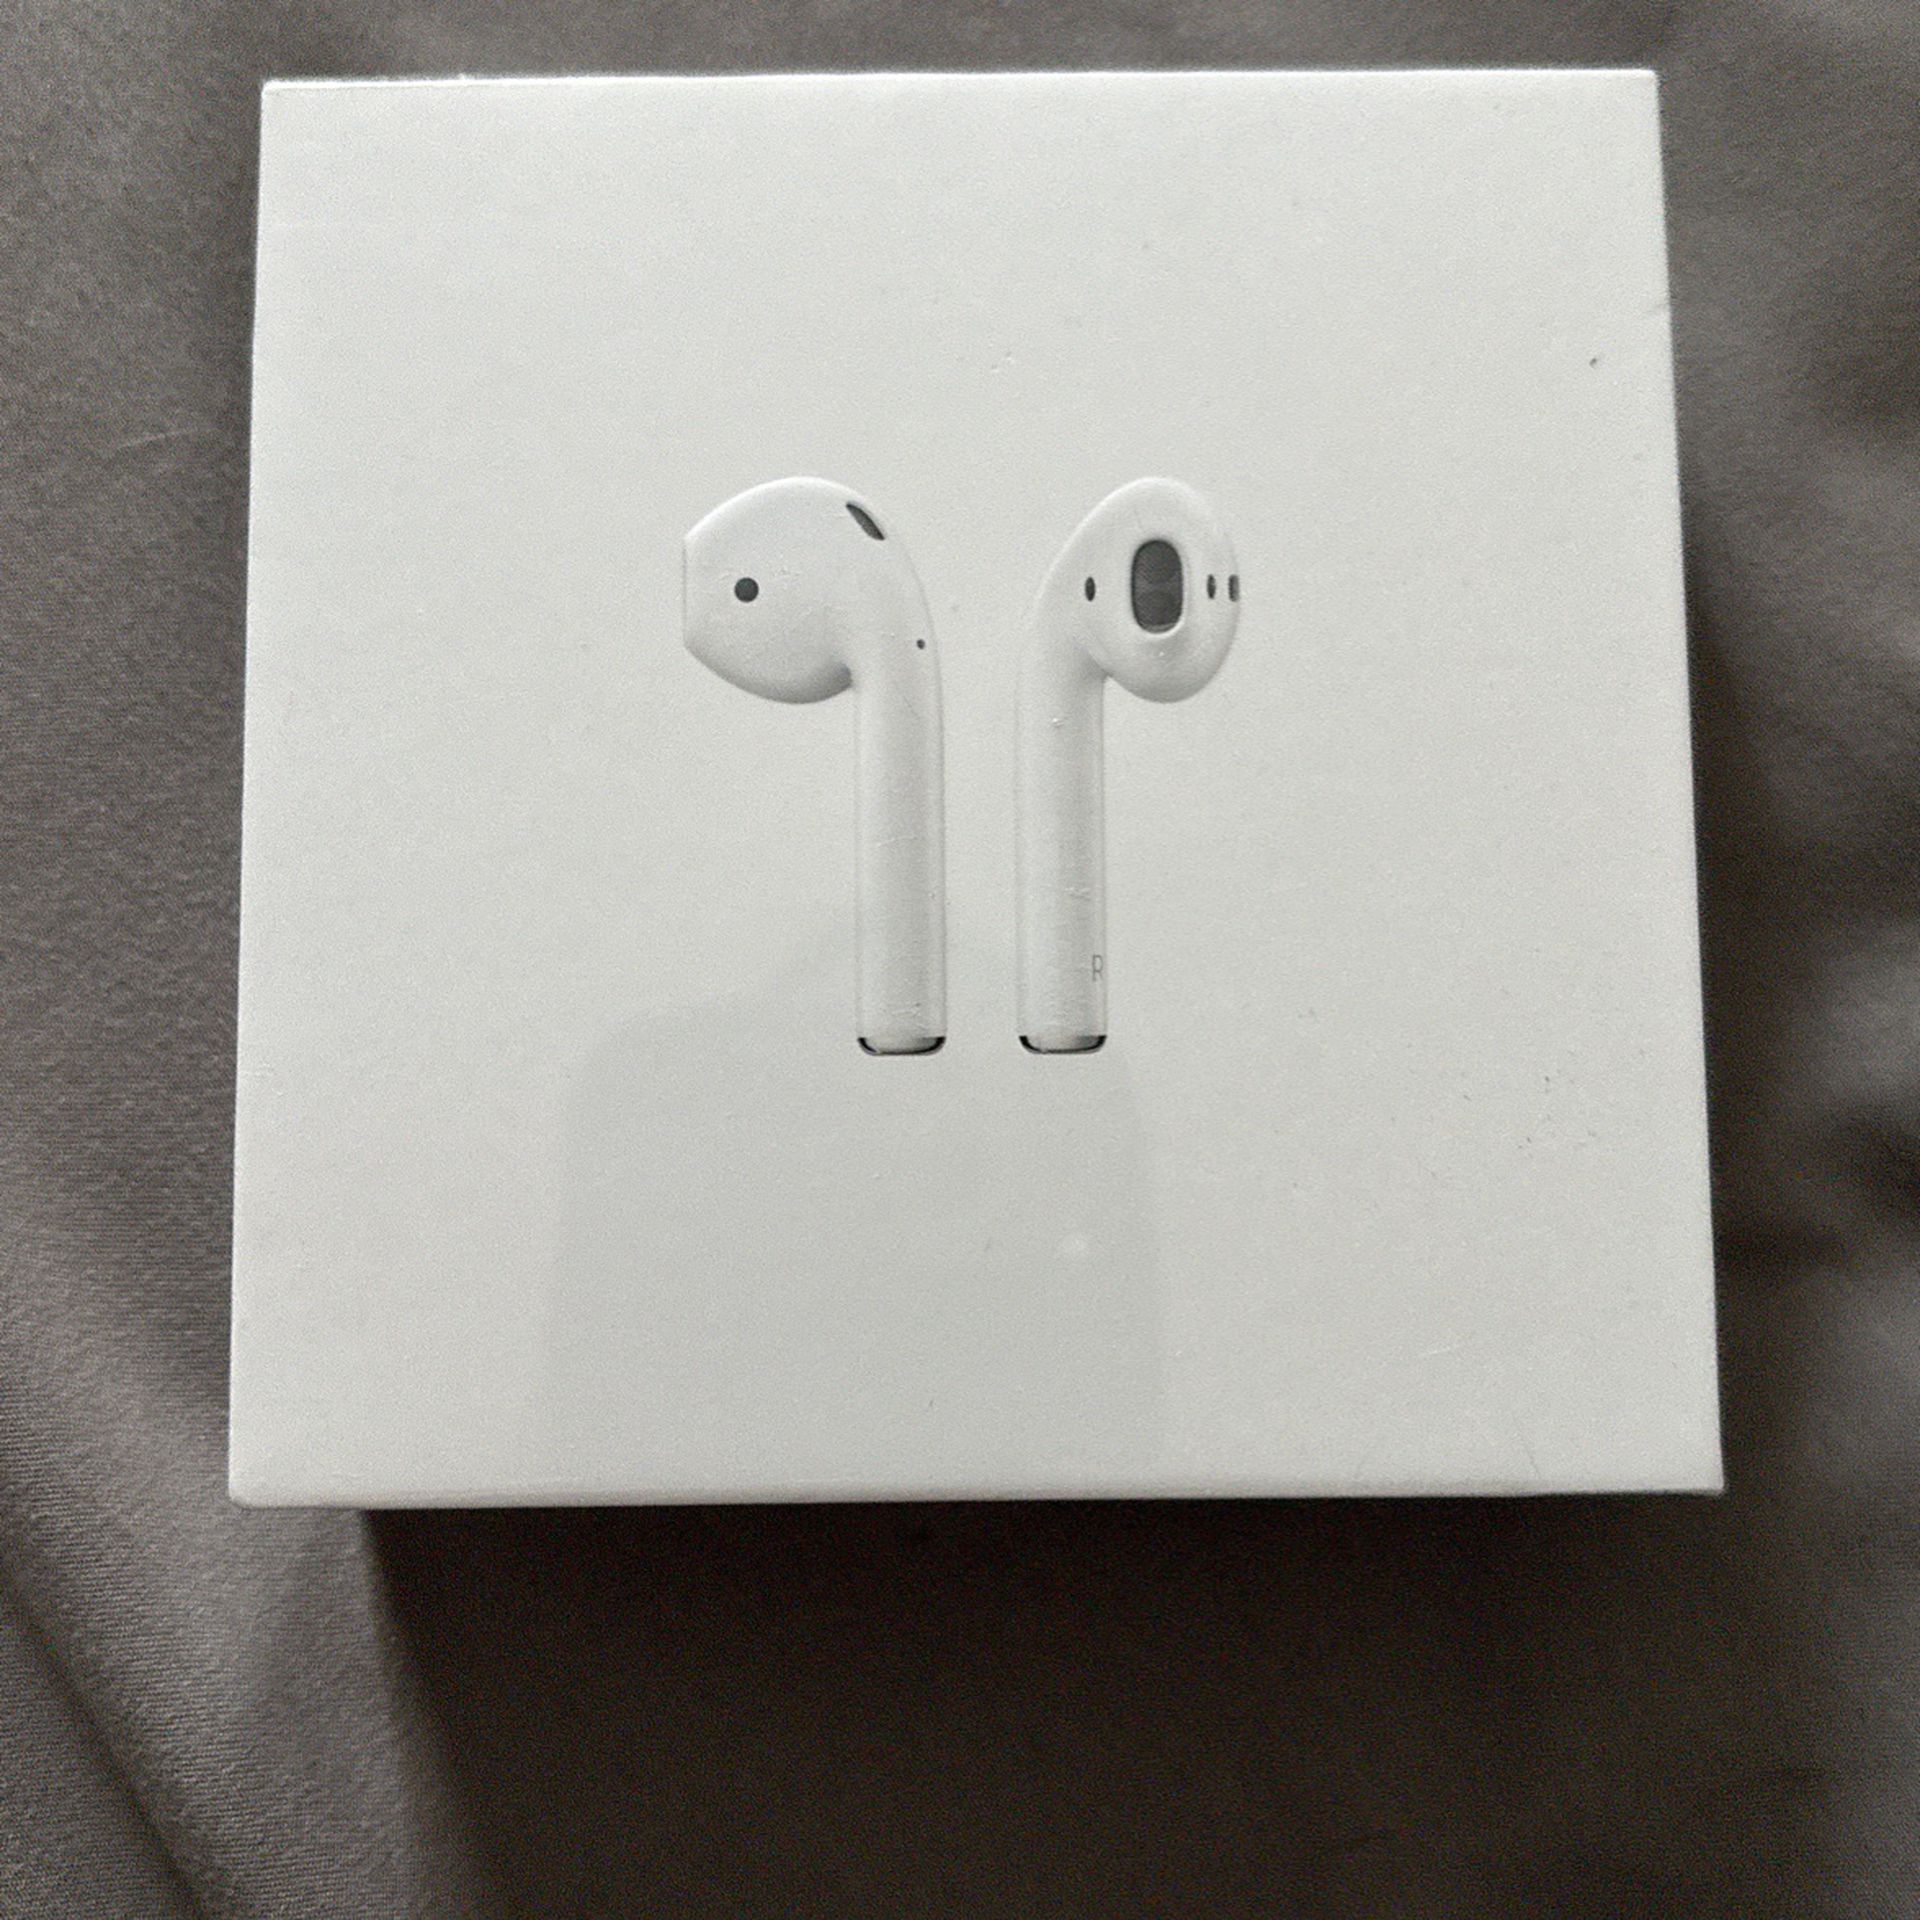  Unused/Unopened Apple Airpods (2nd Generarion) with charging case